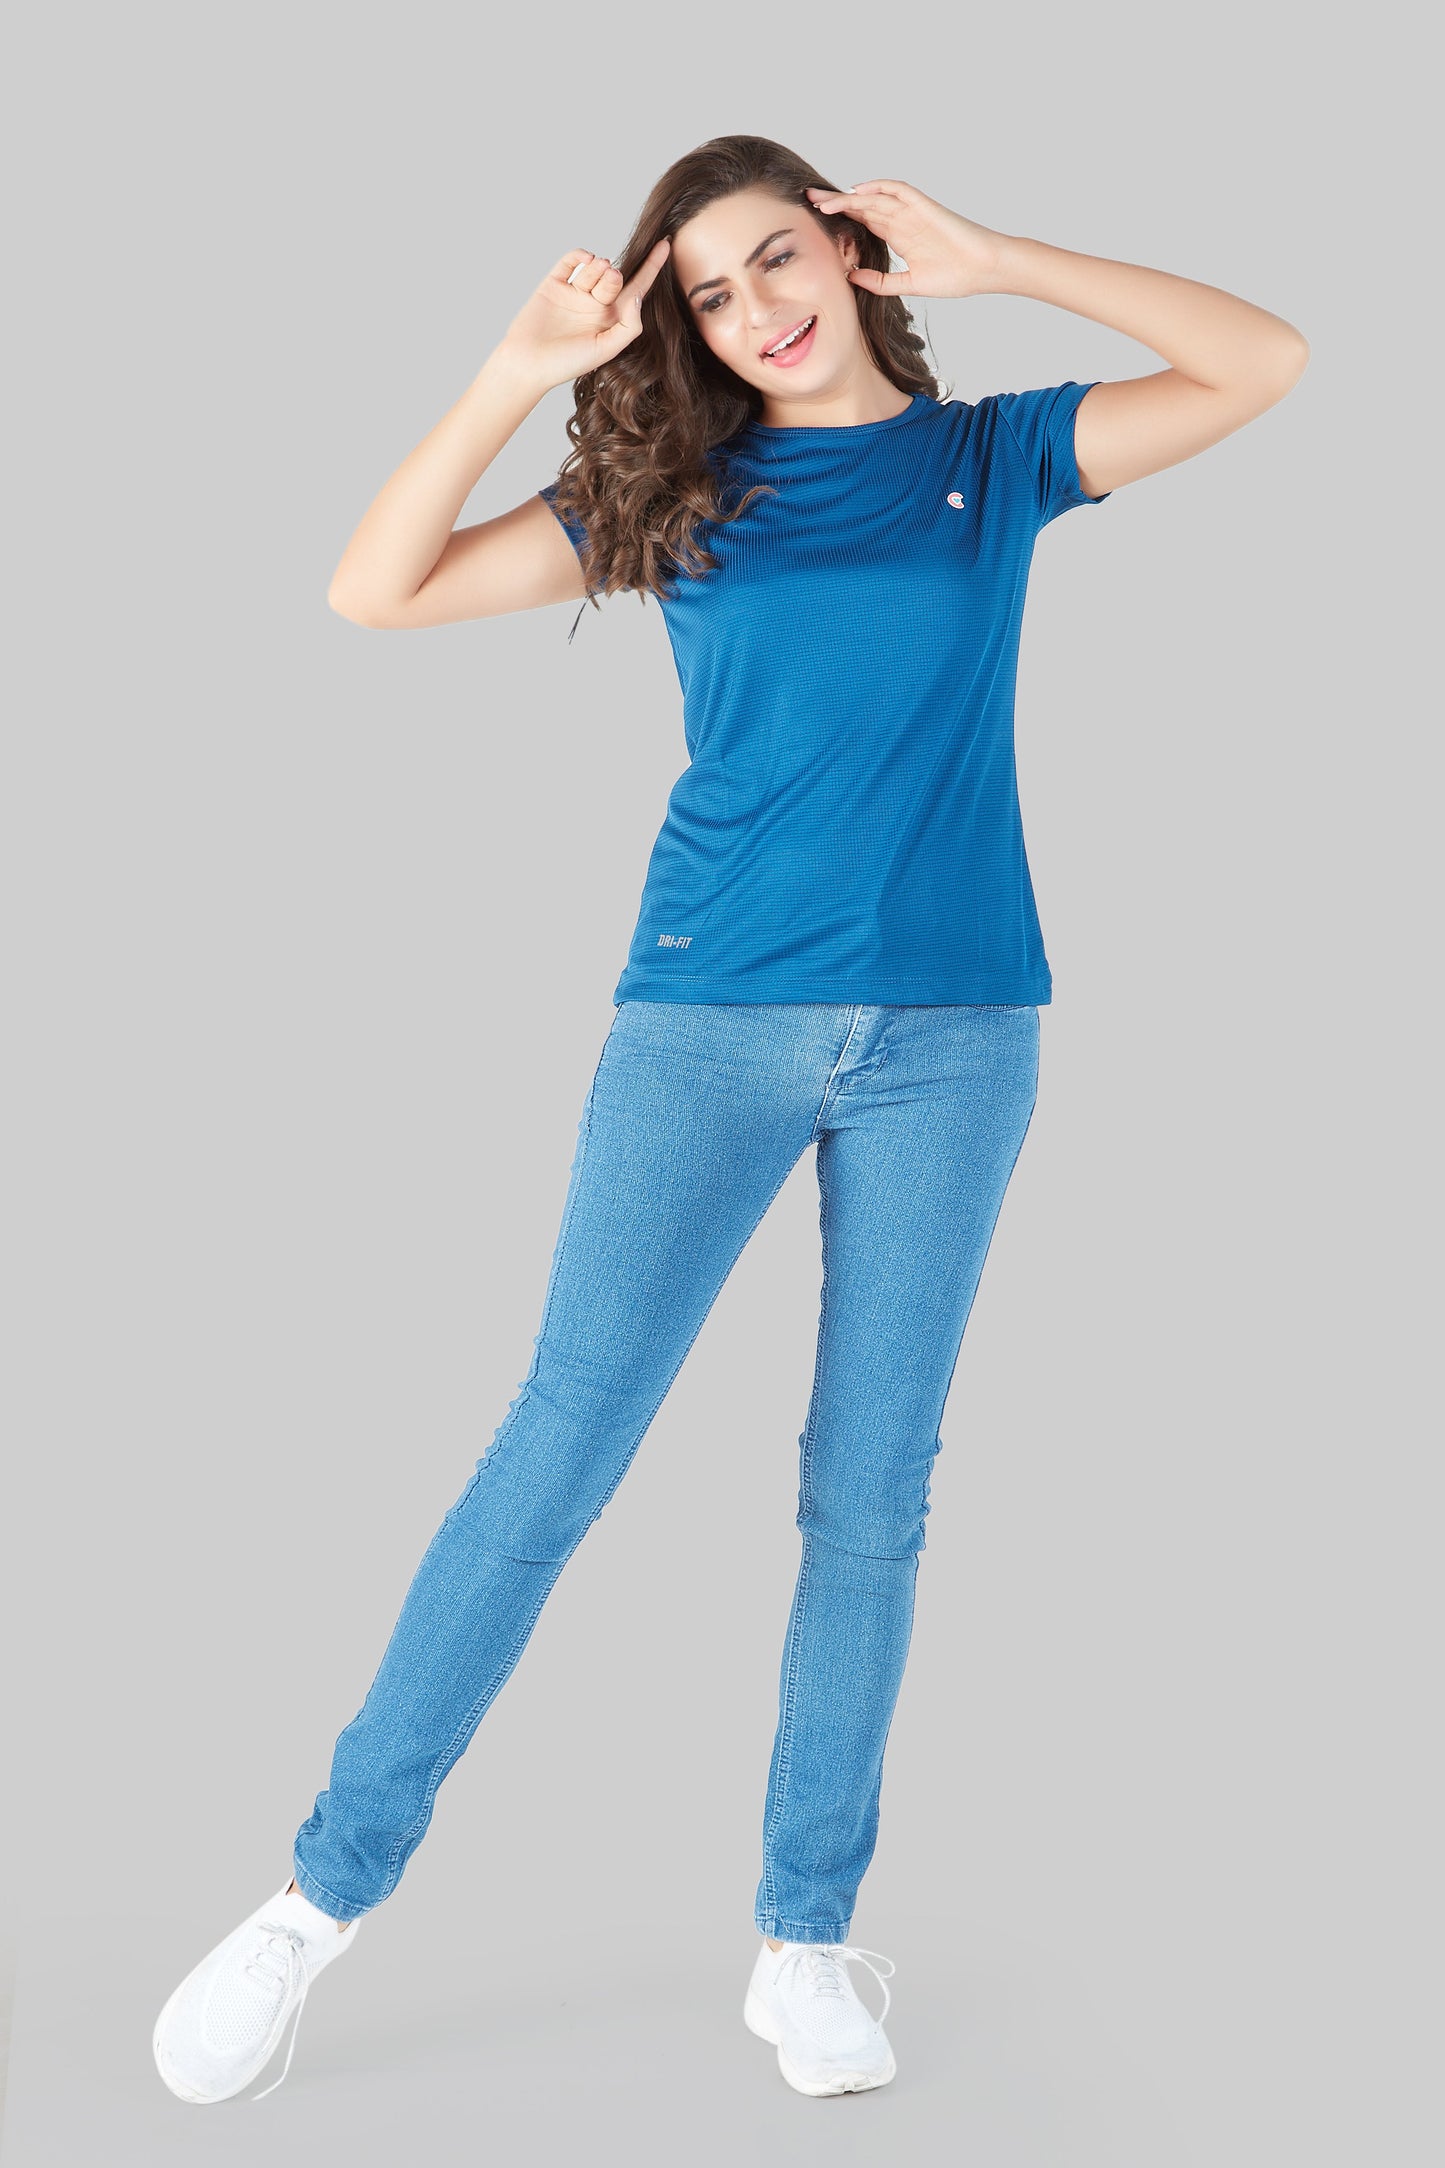 Dri-Fit T-Shirts For Women Half Sleeves Activewear At Best Prices